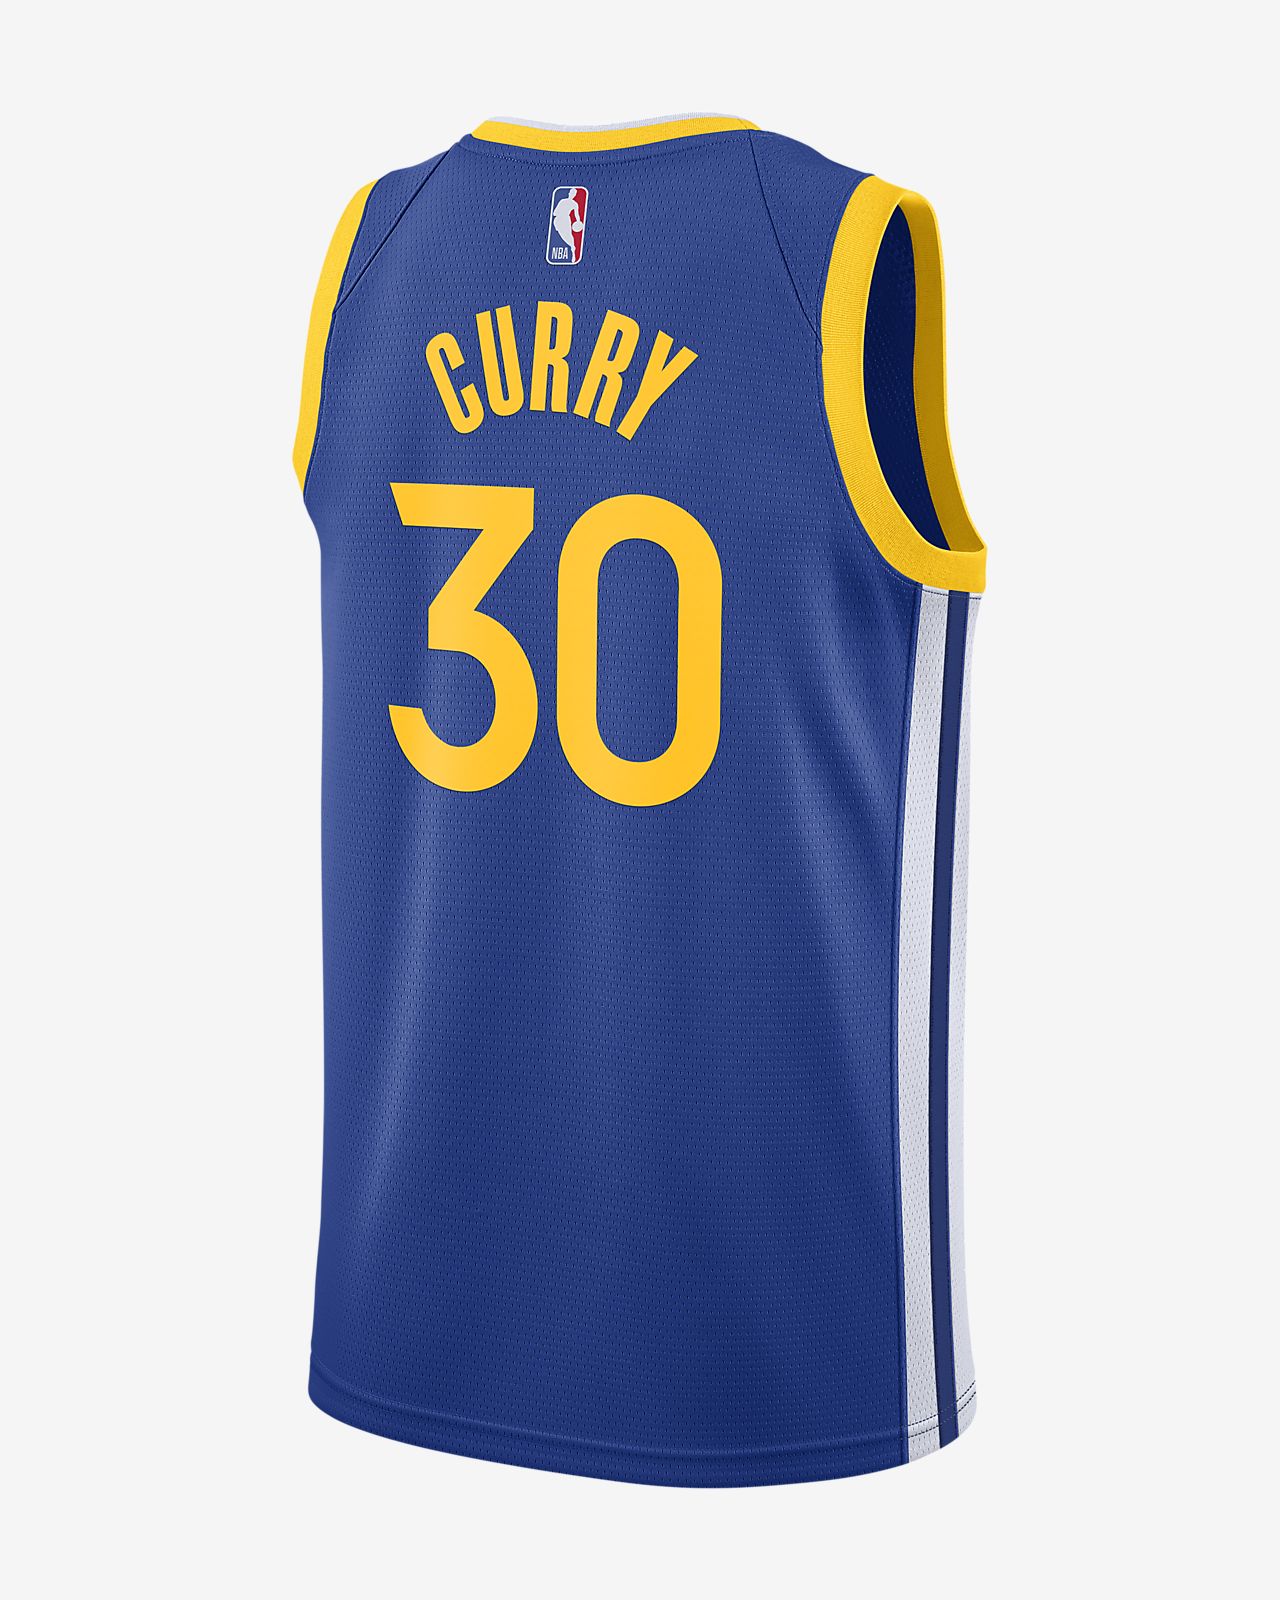 stephen curry jersey nike